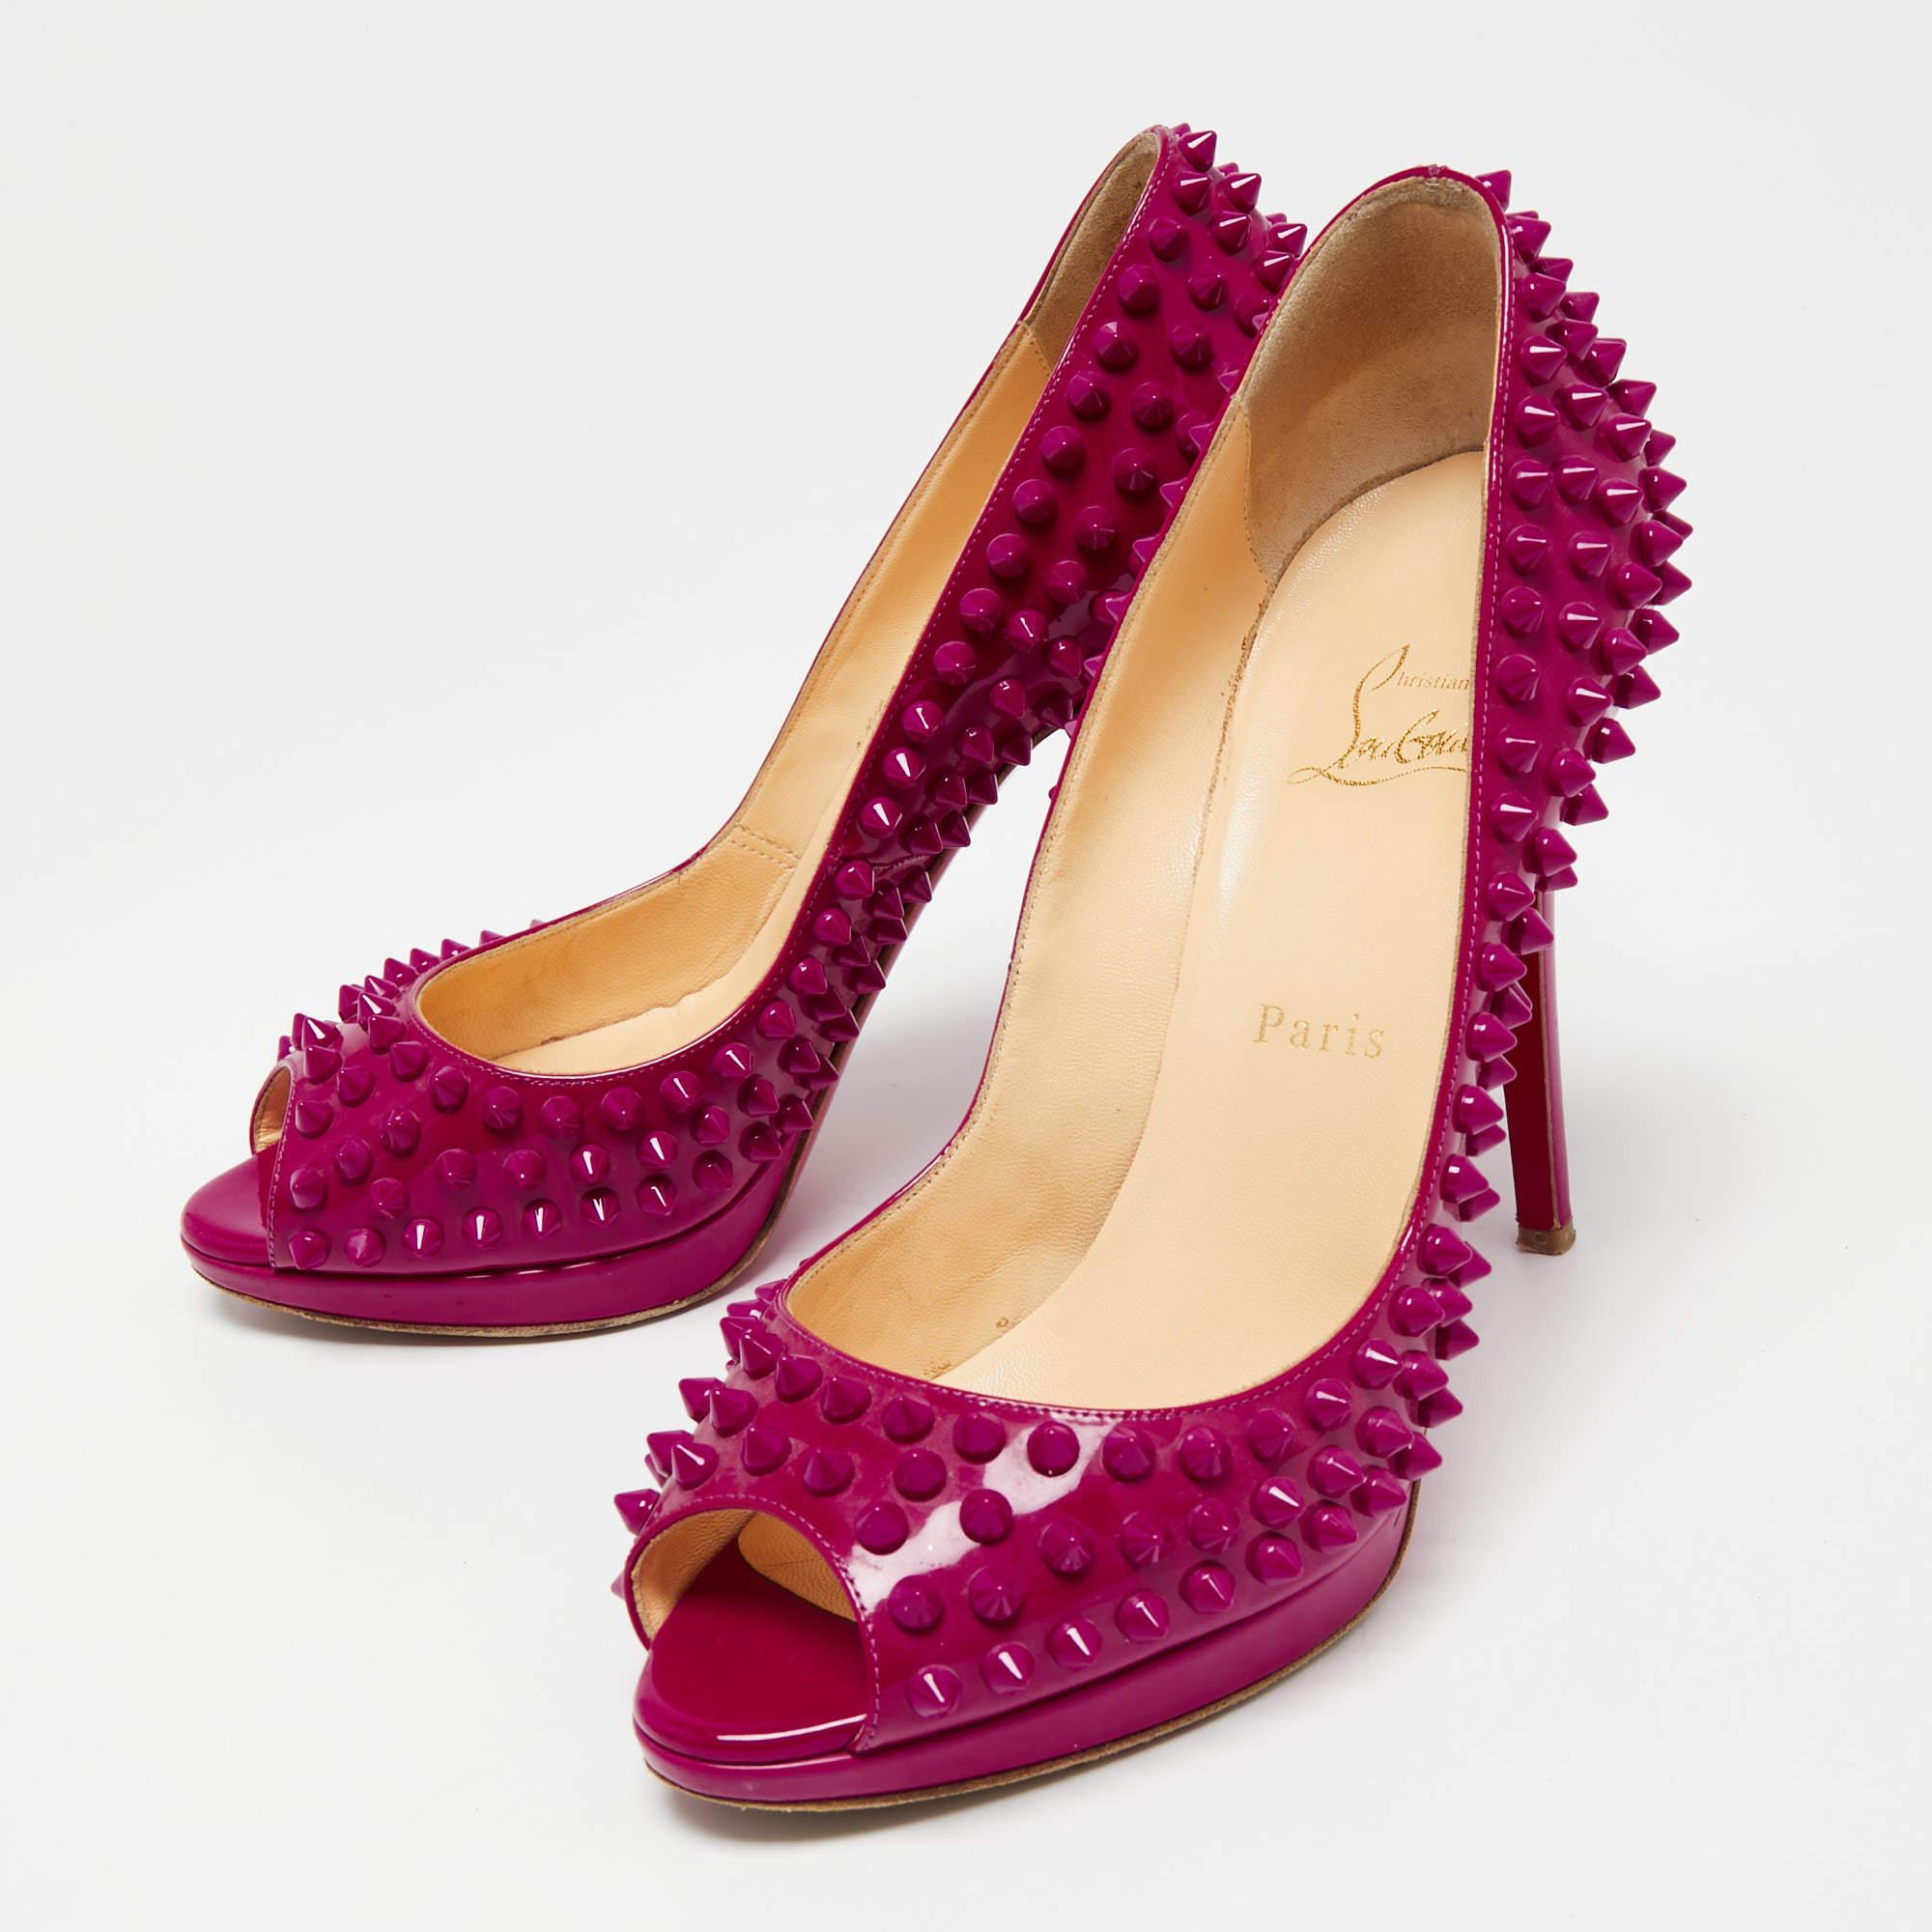 Women's Christian Louboutin Hot Pink Patent Yolanda Spiked Peep-Toe Pumps Size 38.5 For Sale